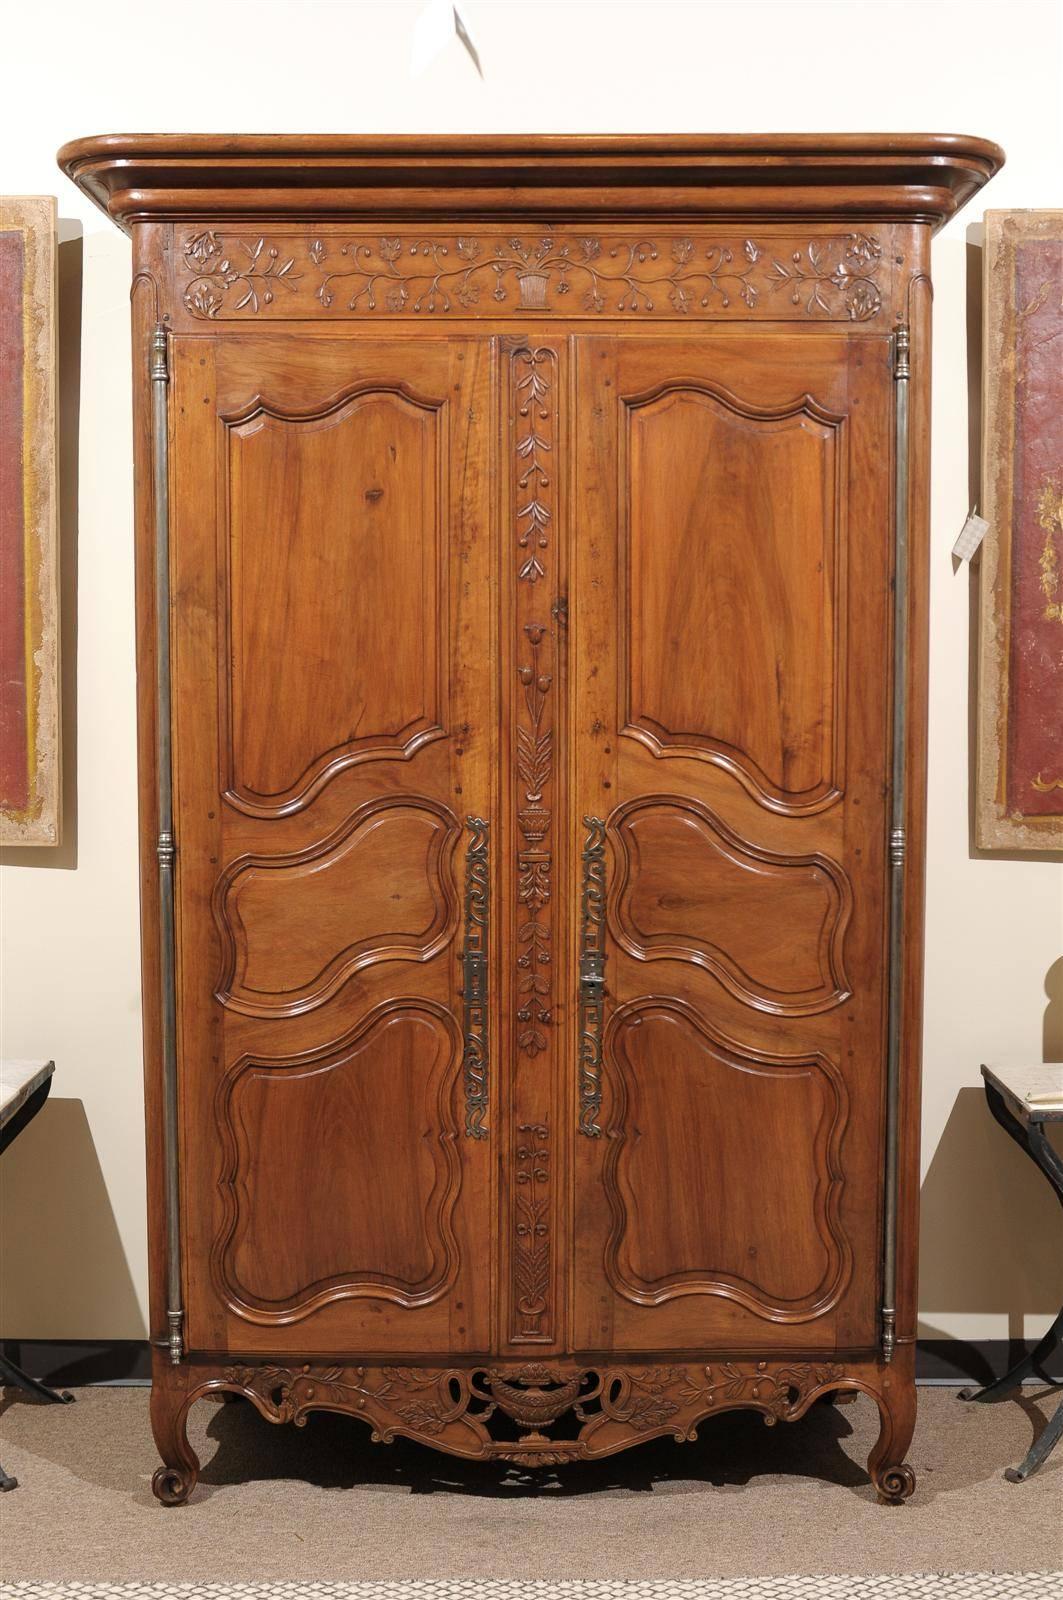 18th Century Walnut Provencal Armoire, circa 1760
This exquisite armoire has been adorned with beautiful carvings of olives, a variety of leaves, and flowers. The most outstanding carving is the reticulated urn on the apron of the armoire. This